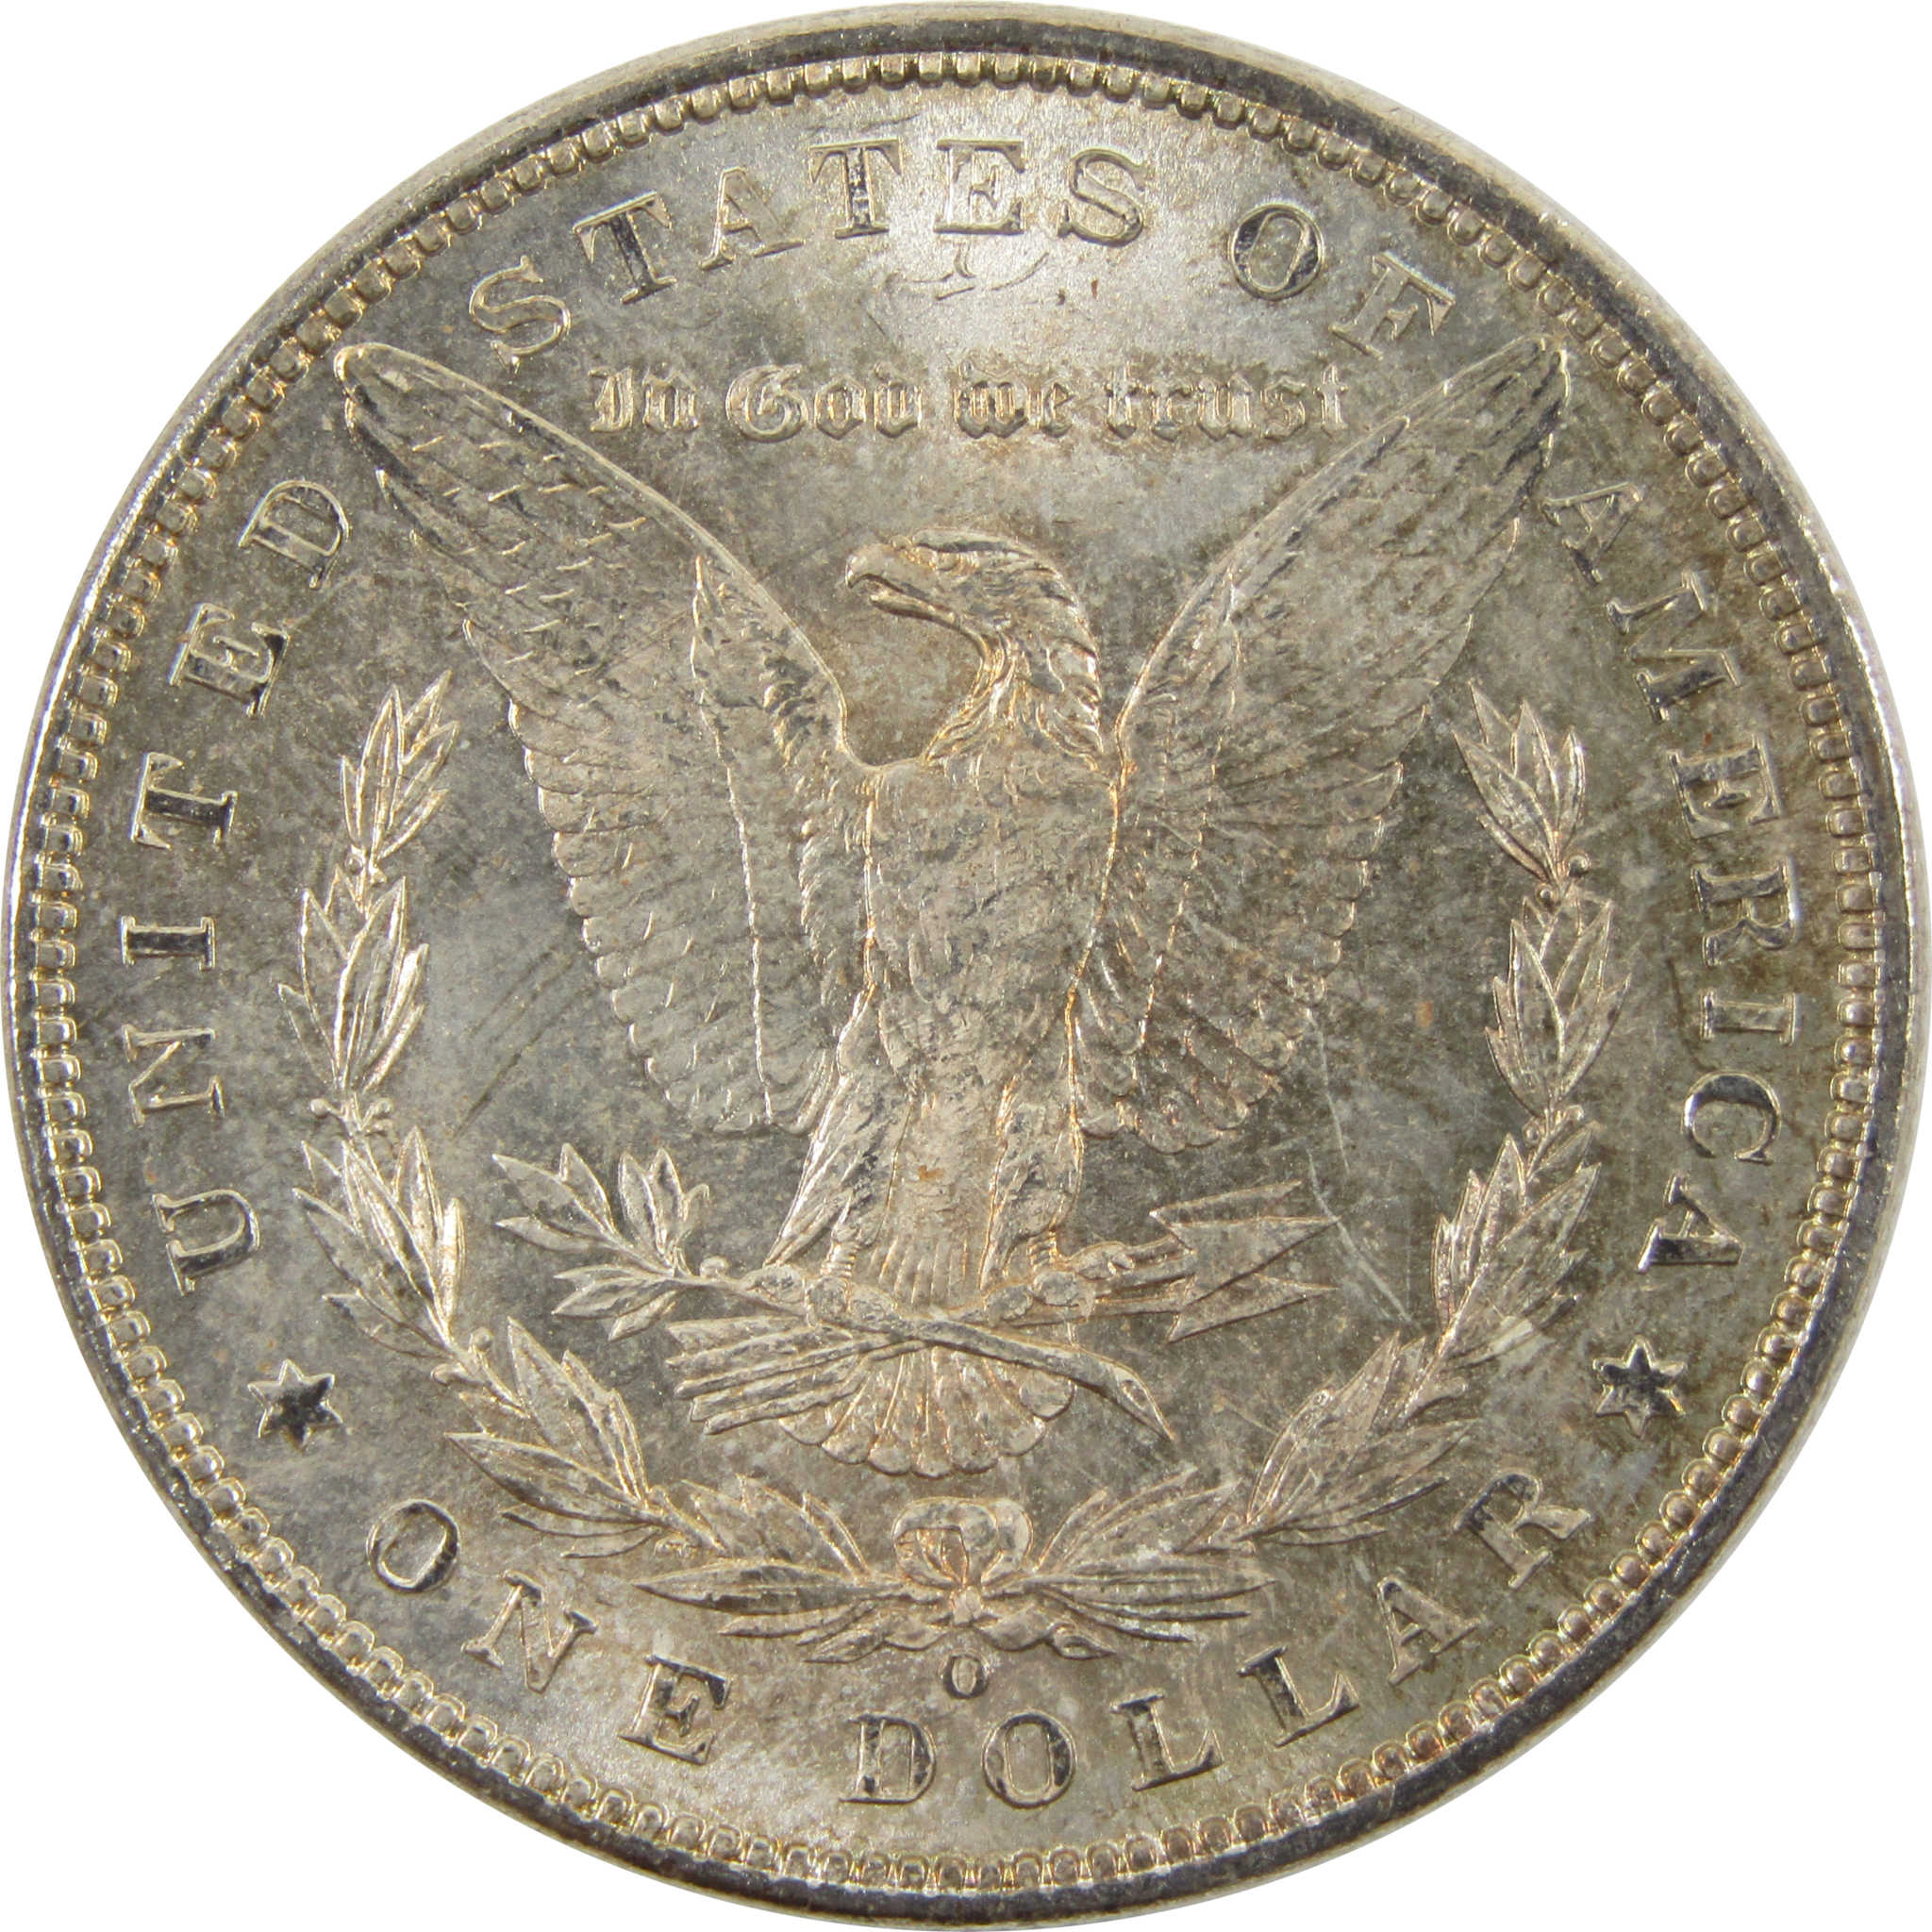 1901 O Morgan Dollar Uncirculated Details 90% Silver $1 SKU:I10461 - Morgan coin - Morgan silver dollar - Morgan silver dollar for sale - Profile Coins &amp; Collectibles